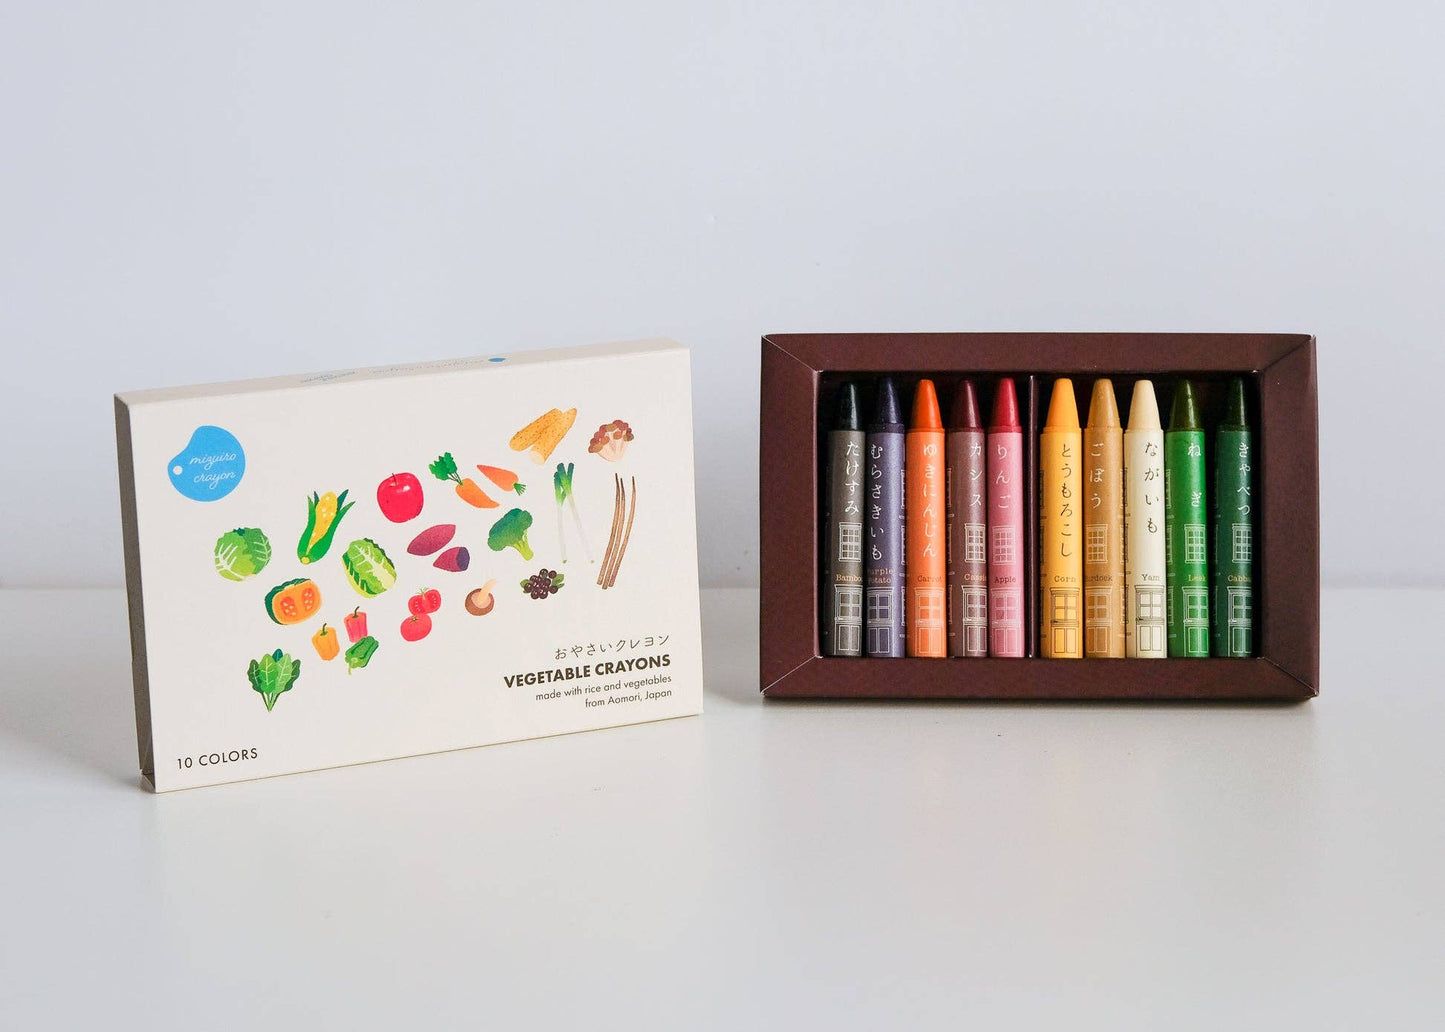 Vegetable Crayons - 10 Crayons Made of Vegetables